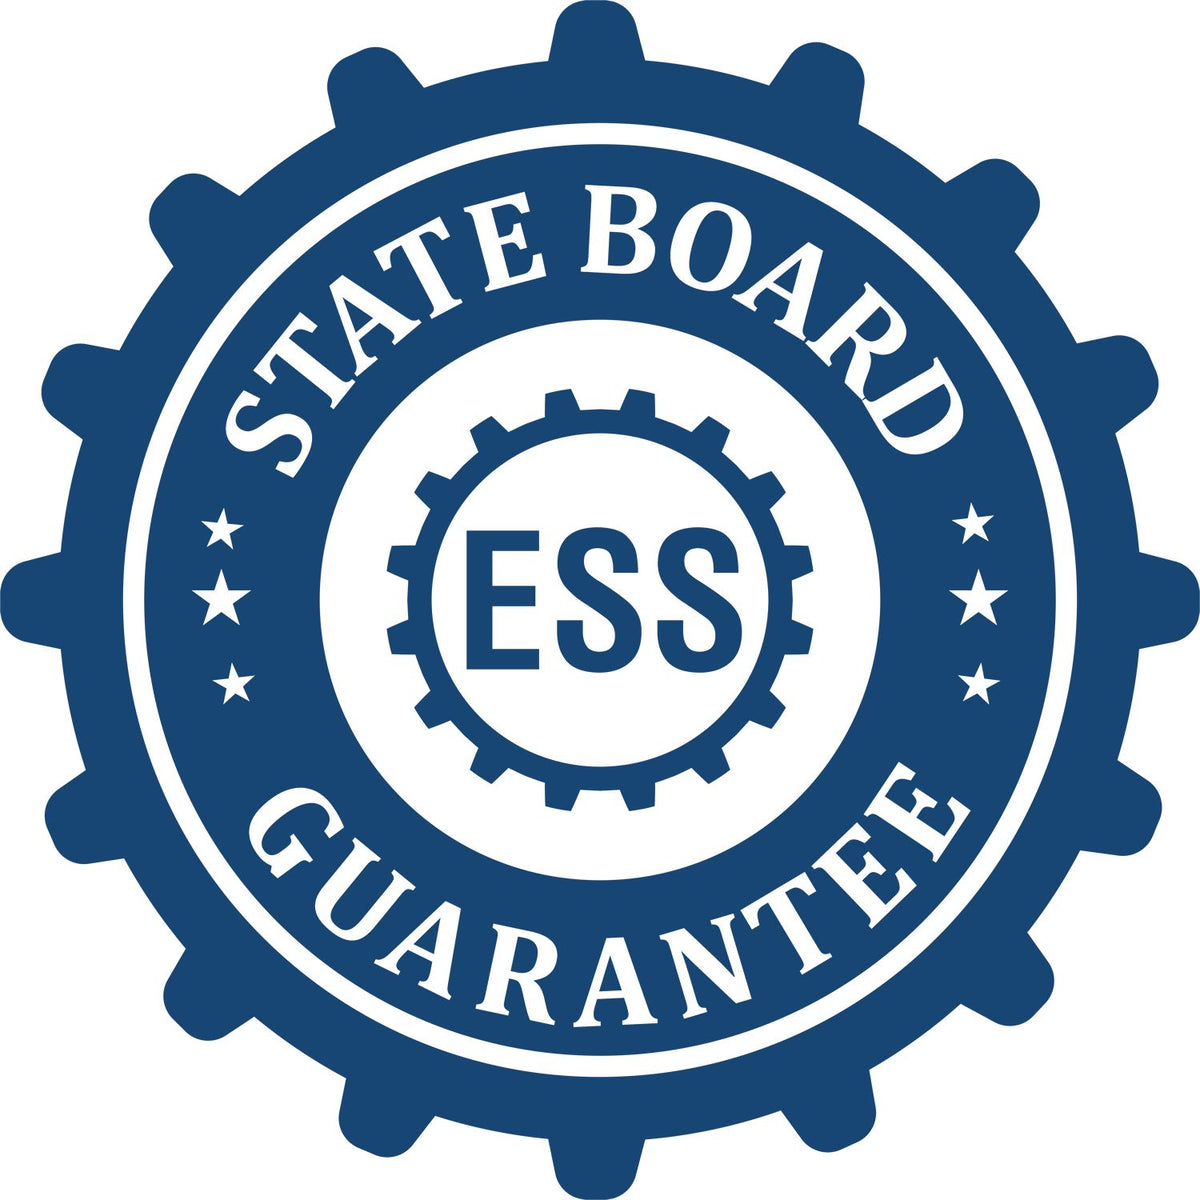 An emblem in a gear shape illustrating a state board guarantee for the State of Tennessee Extended Long Reach Geologist Seal